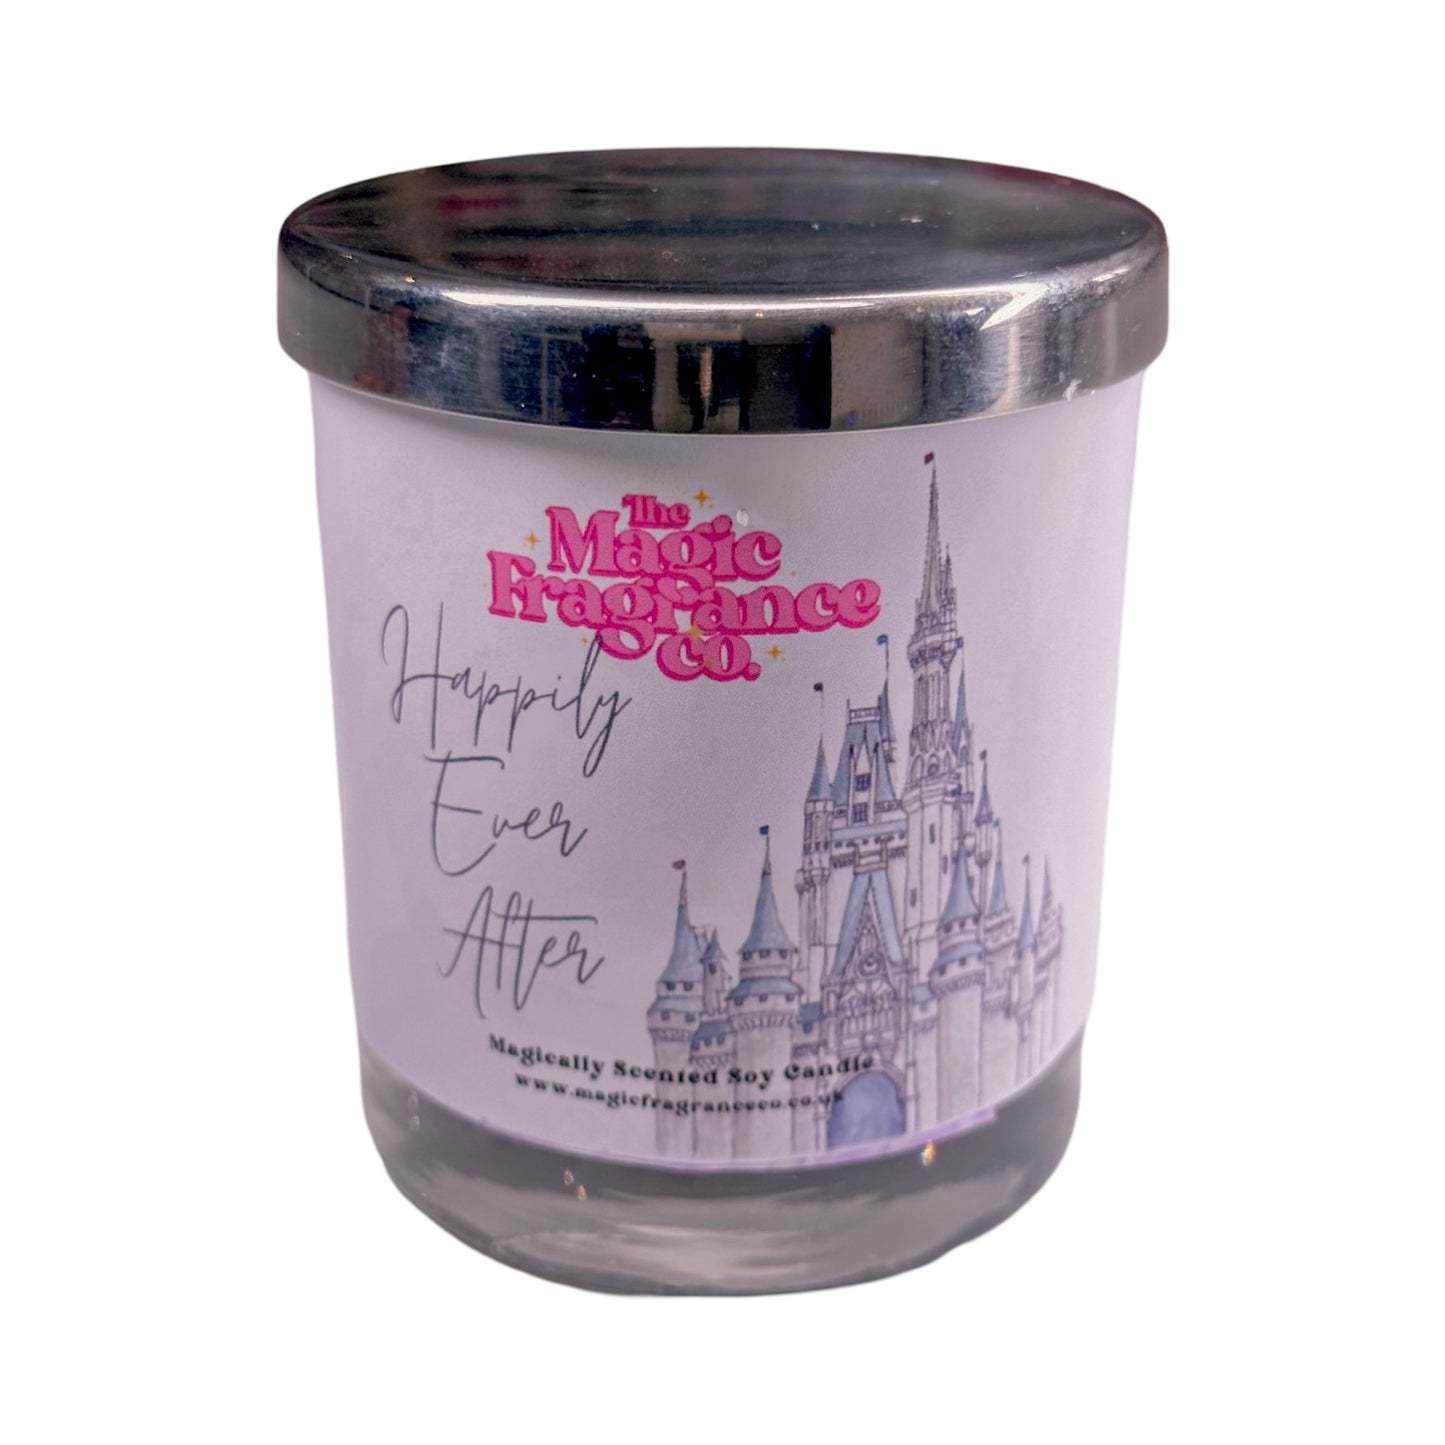 Happily Ever After Luxury Soy Candle